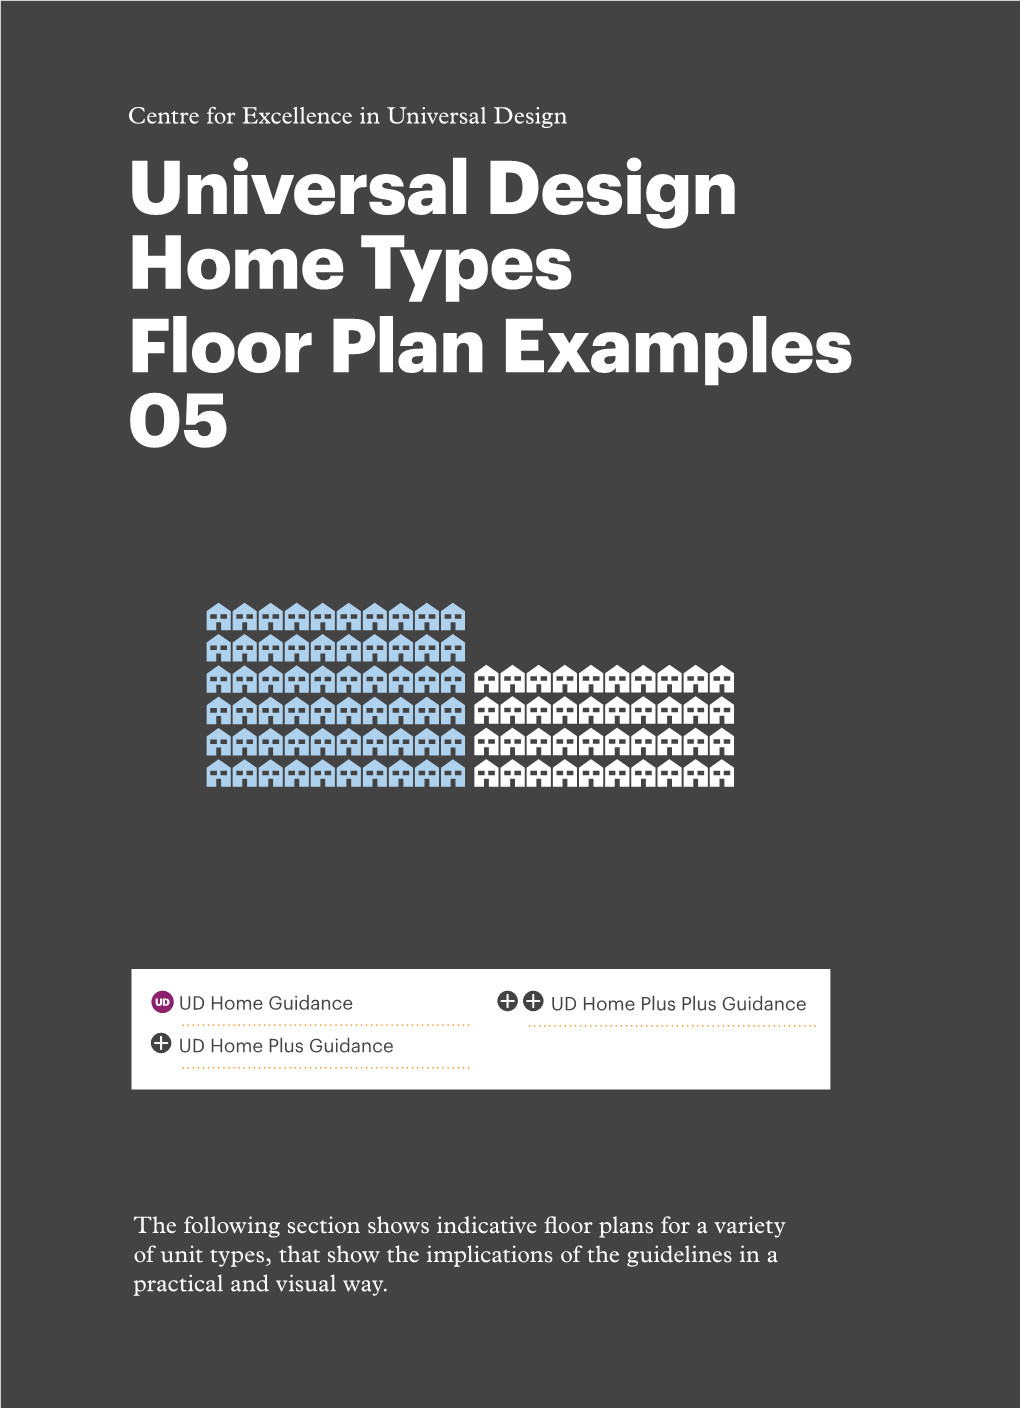 Universal Design Guidelines for Homes in Ireland